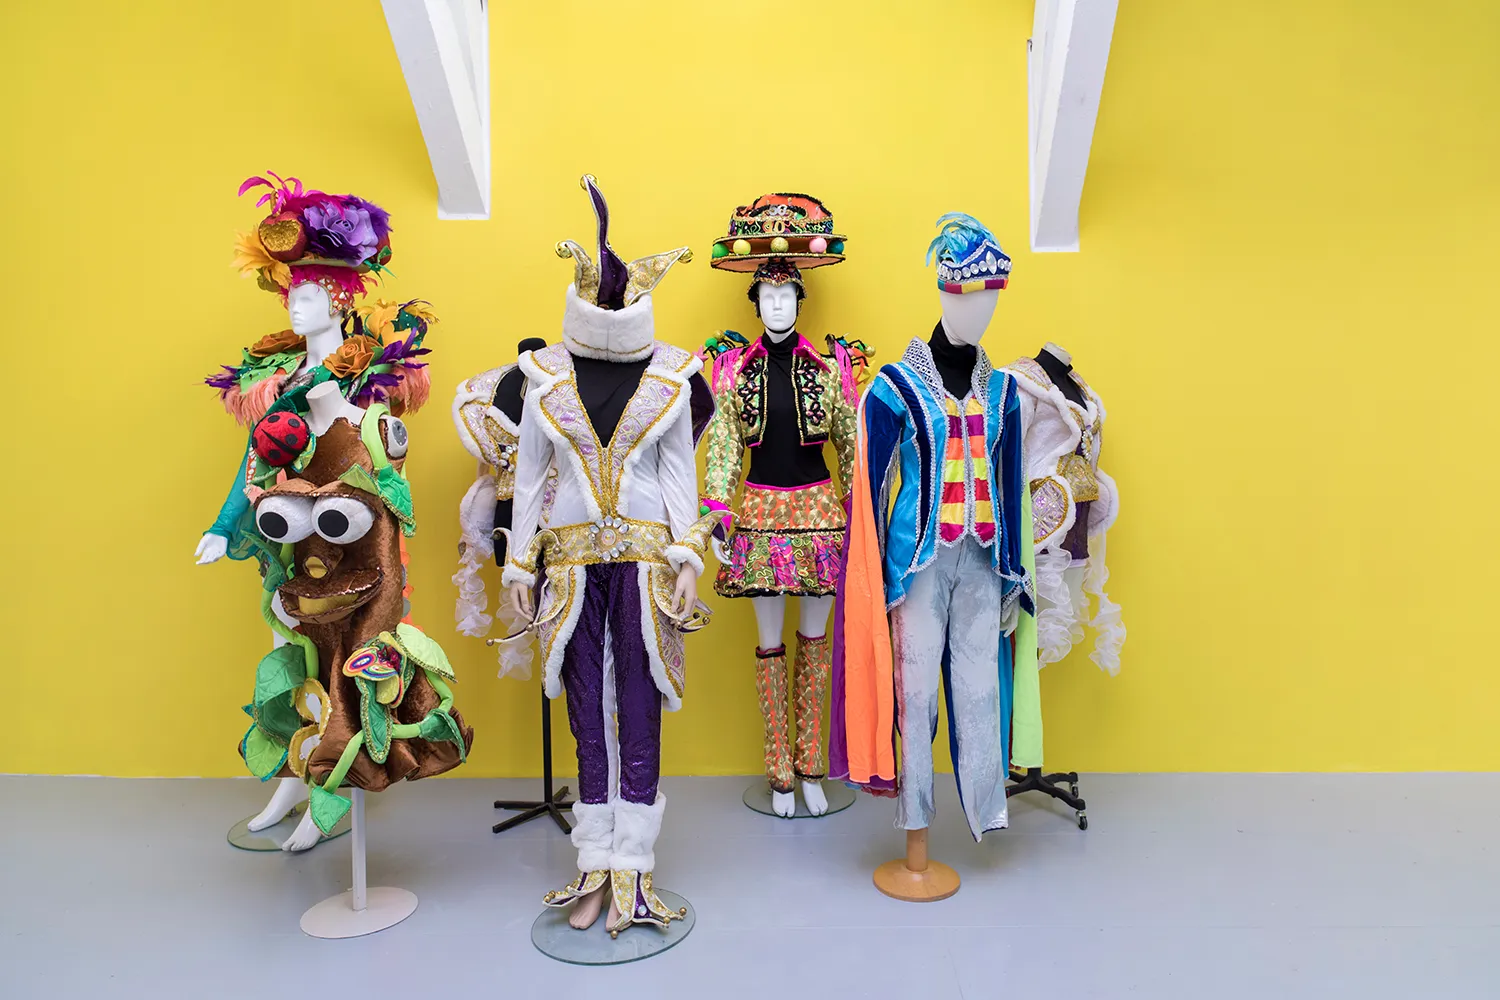 7 mannequins with carnival costumes standing in front of a yellow wall